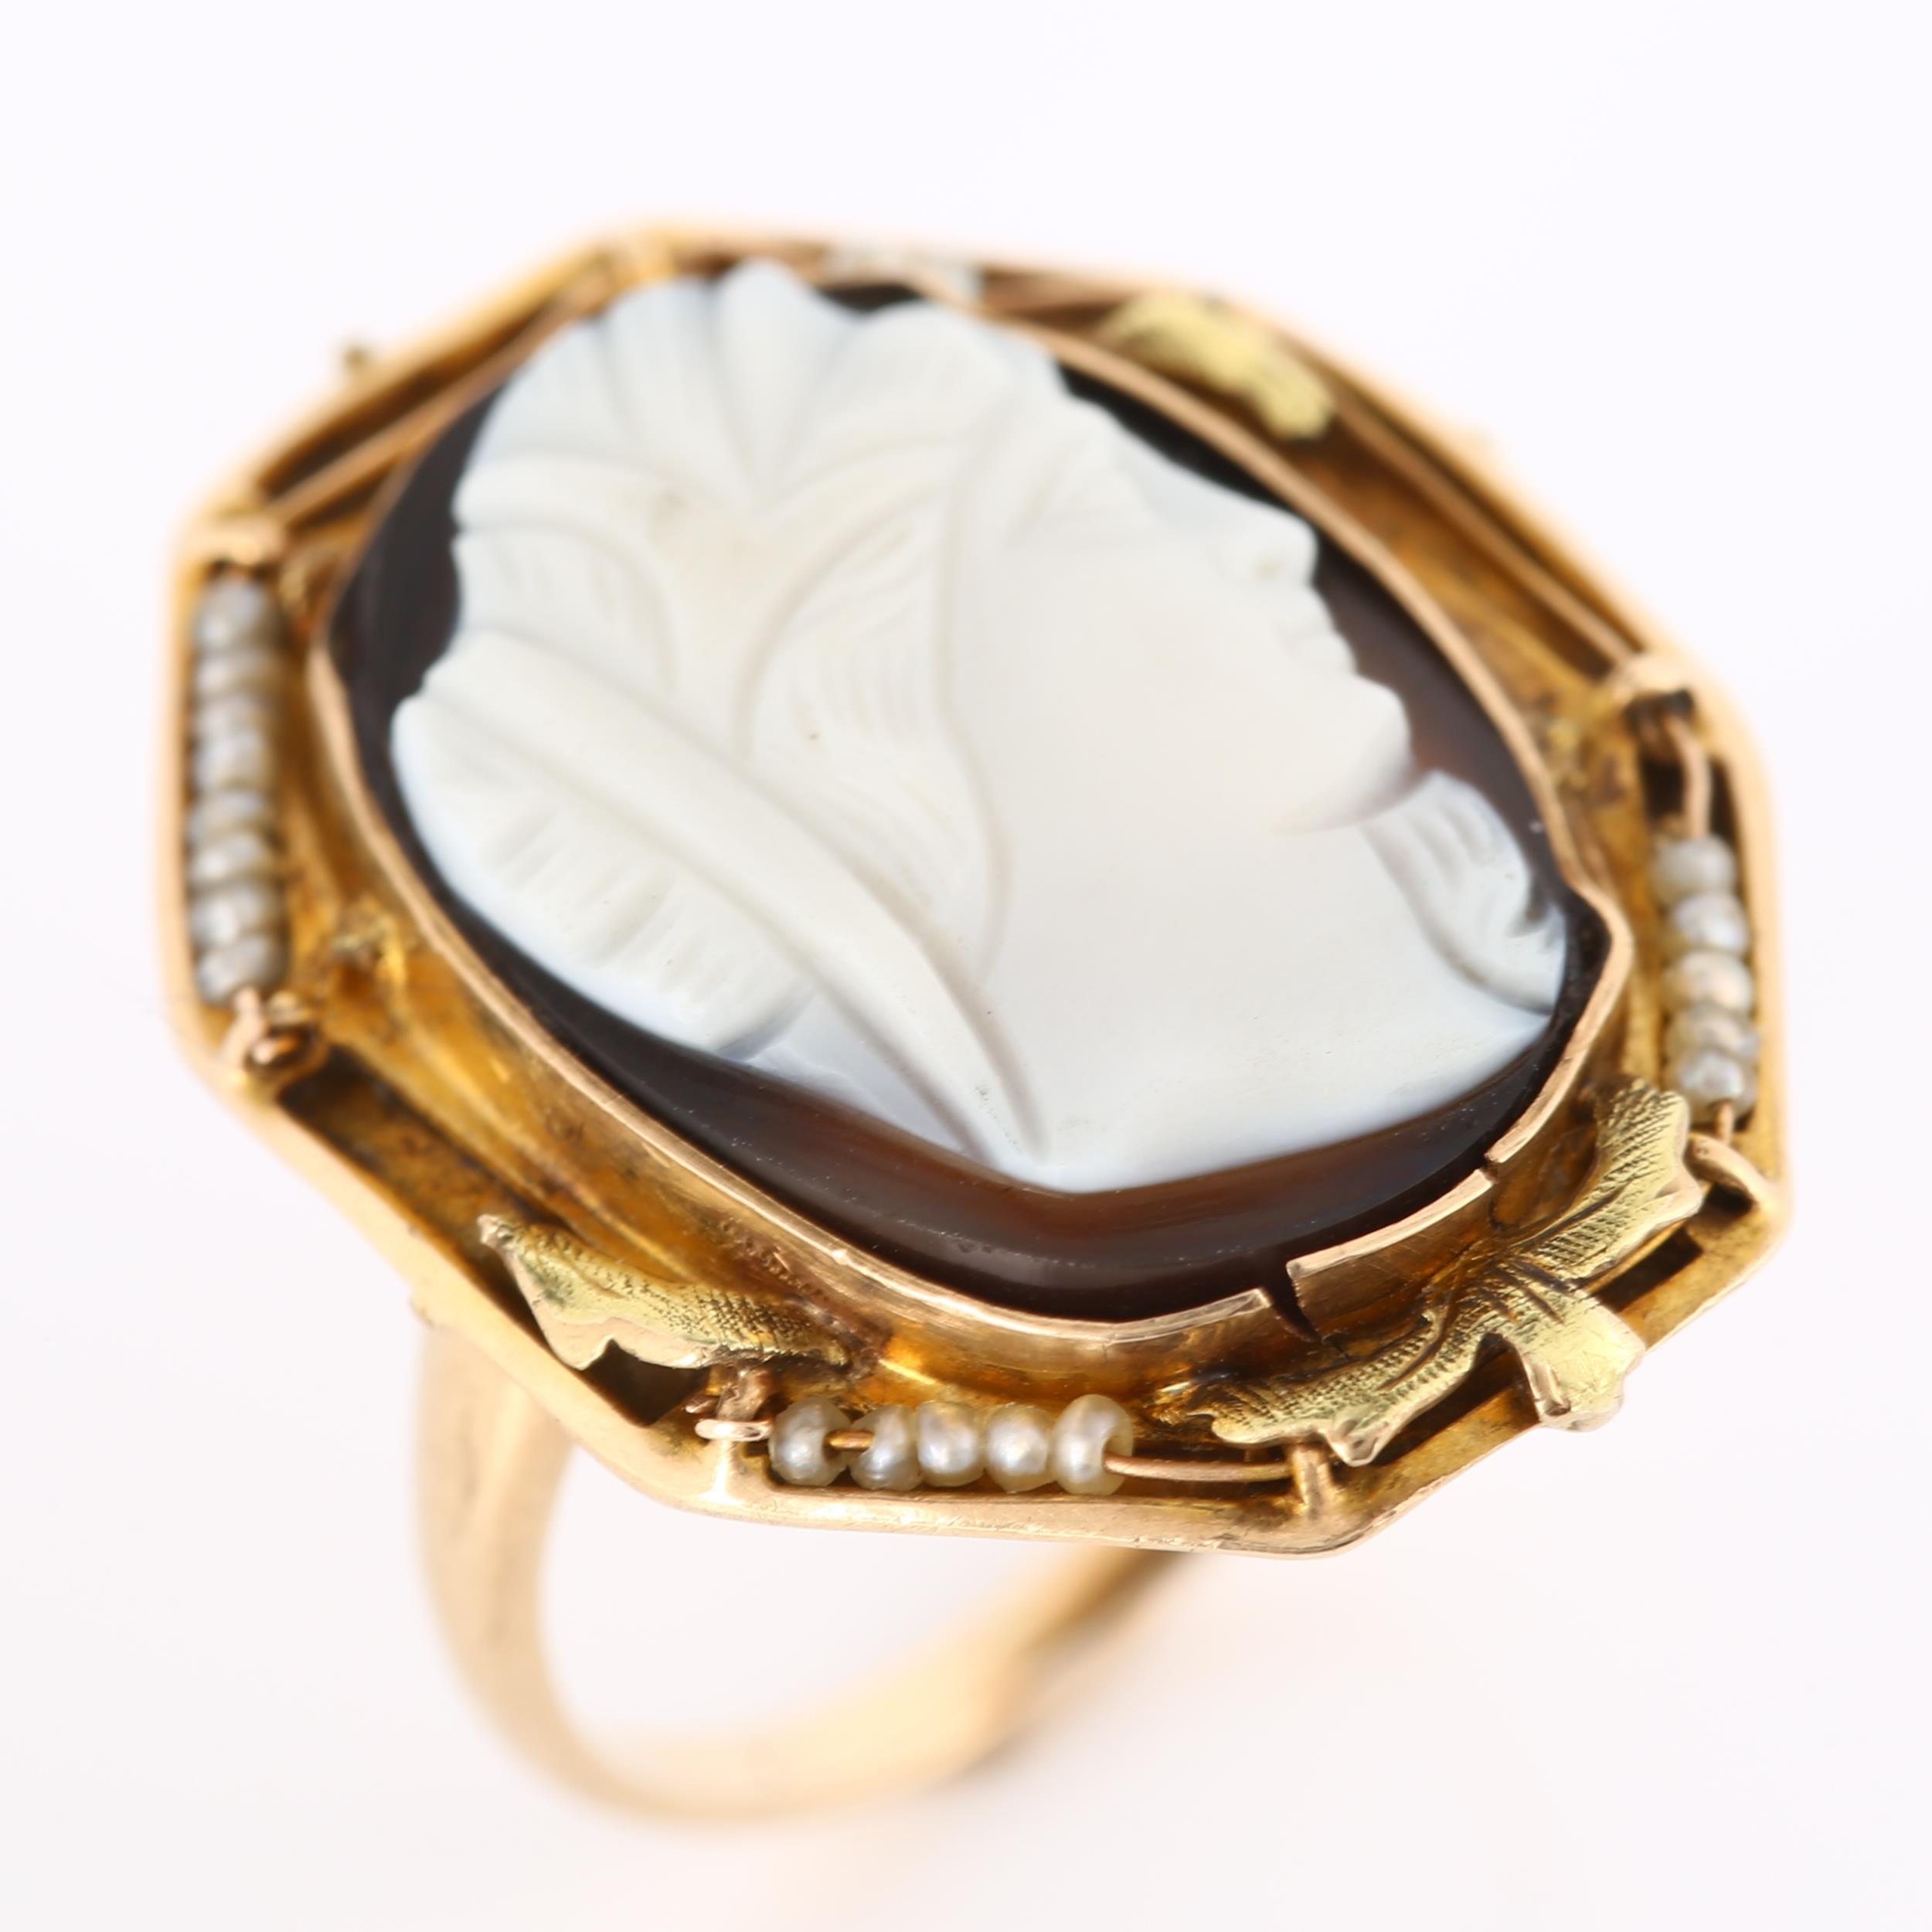 An Antique hardstone cameo ring, 9ct gold settings with relief carved panel depicting female profile - Image 2 of 4